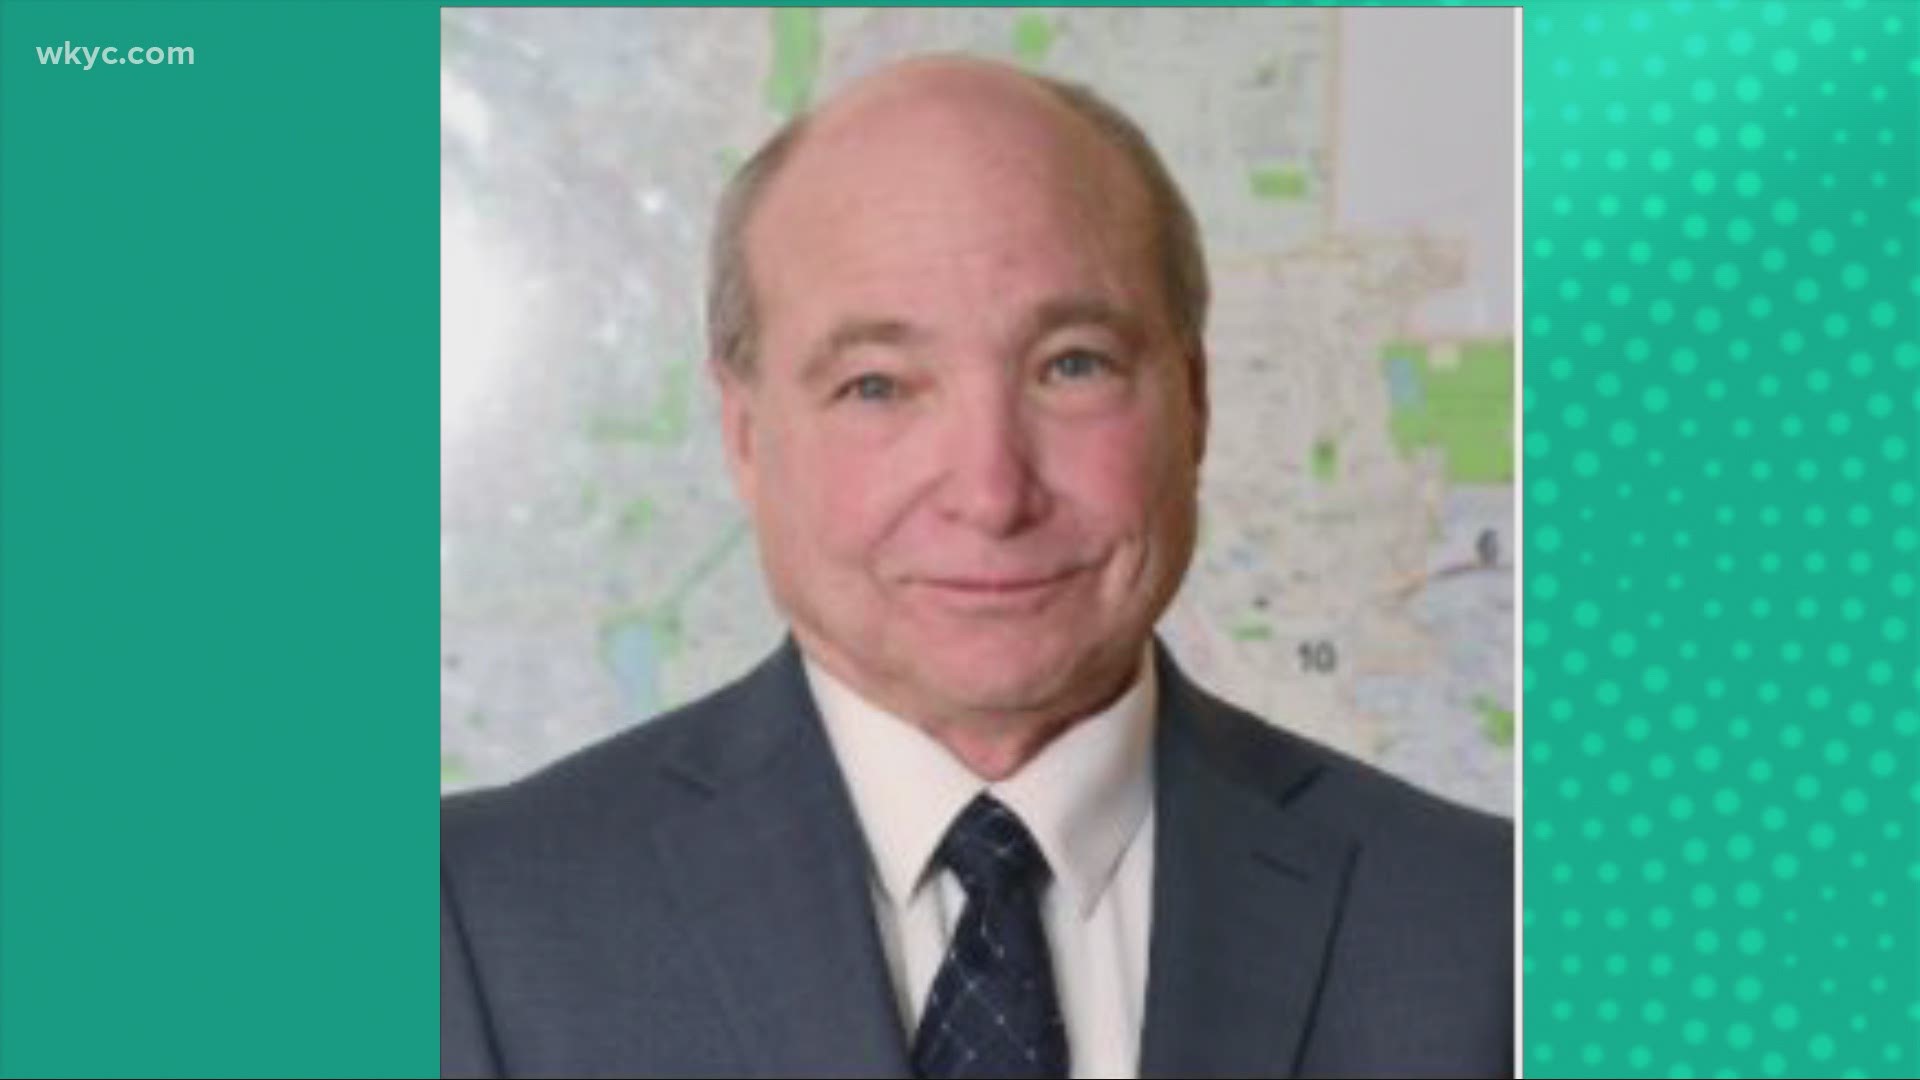 The city of Akron is mourning the death of Ward 1 Councilman Rich Swirsky. He passed away Wednesday after a battle with acute myeloid leukemia, city officials said.